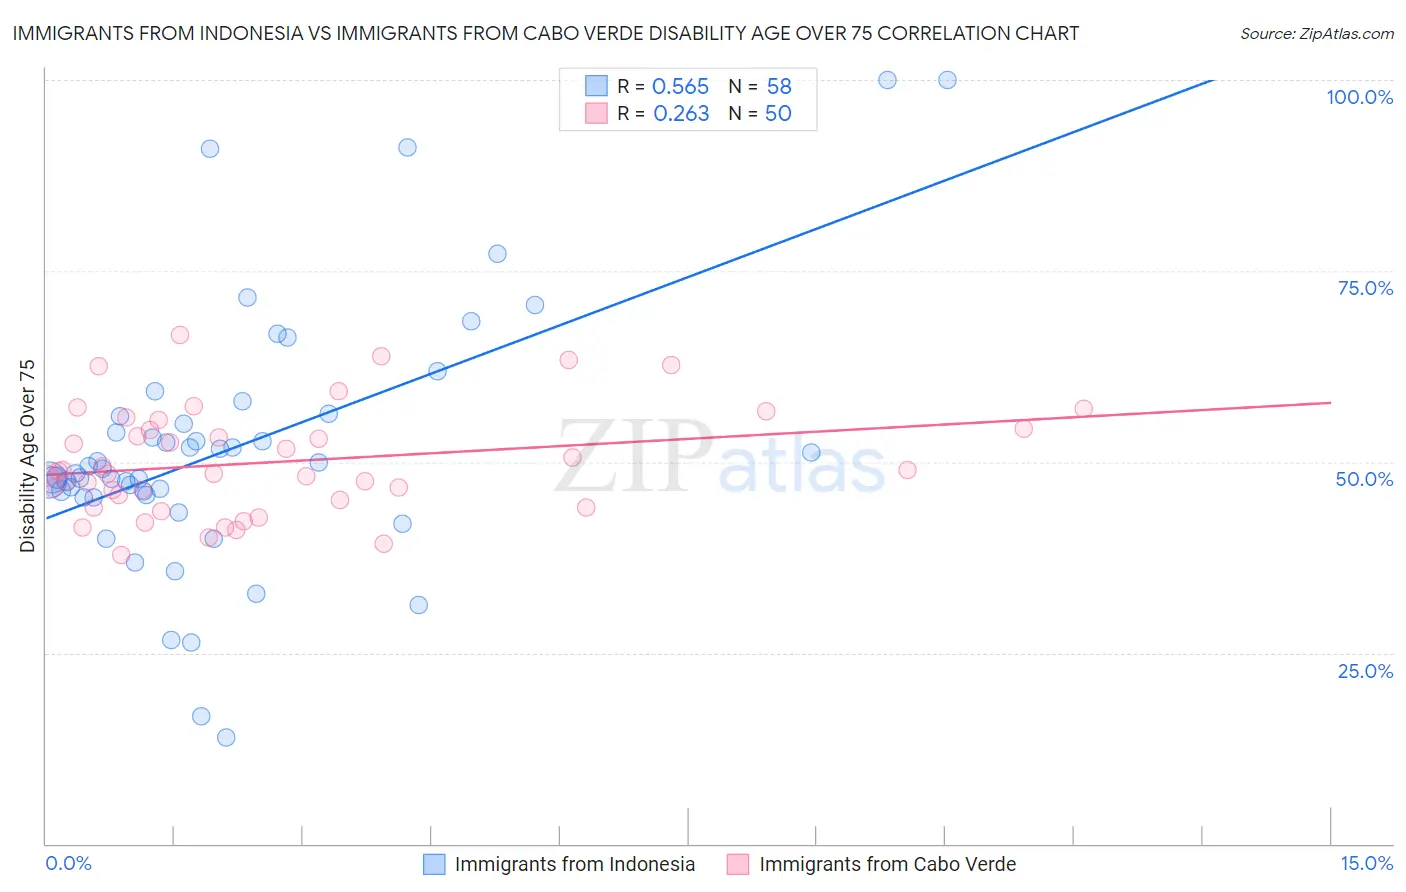 Immigrants from Indonesia vs Immigrants from Cabo Verde Disability Age Over 75